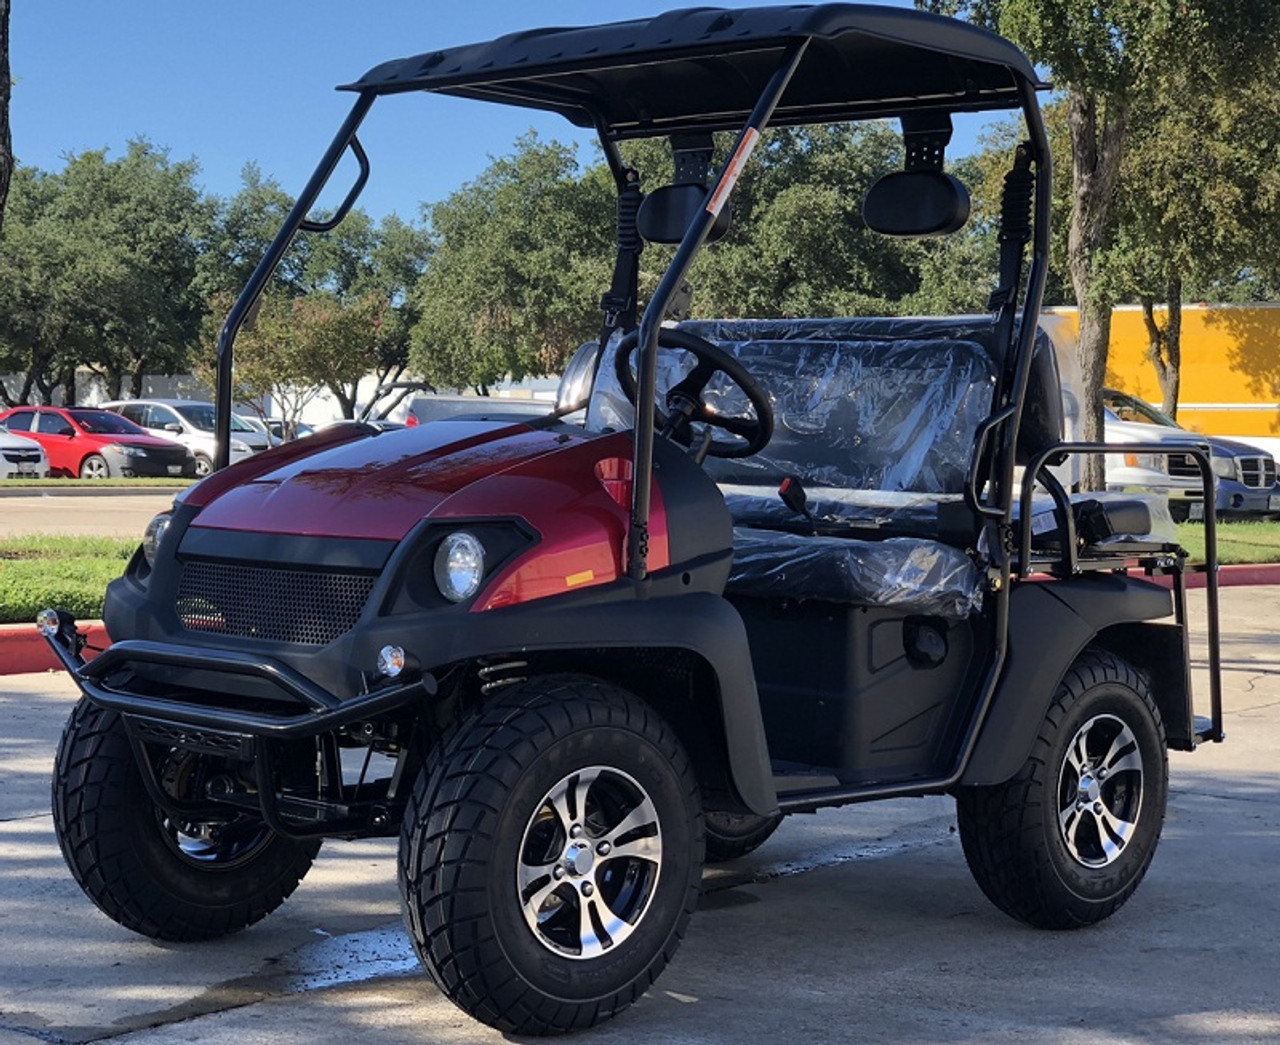 Red- Fully Loaded Cazador OUTFITTER 200 Golf Cart 4 Seater Street Legal UTV